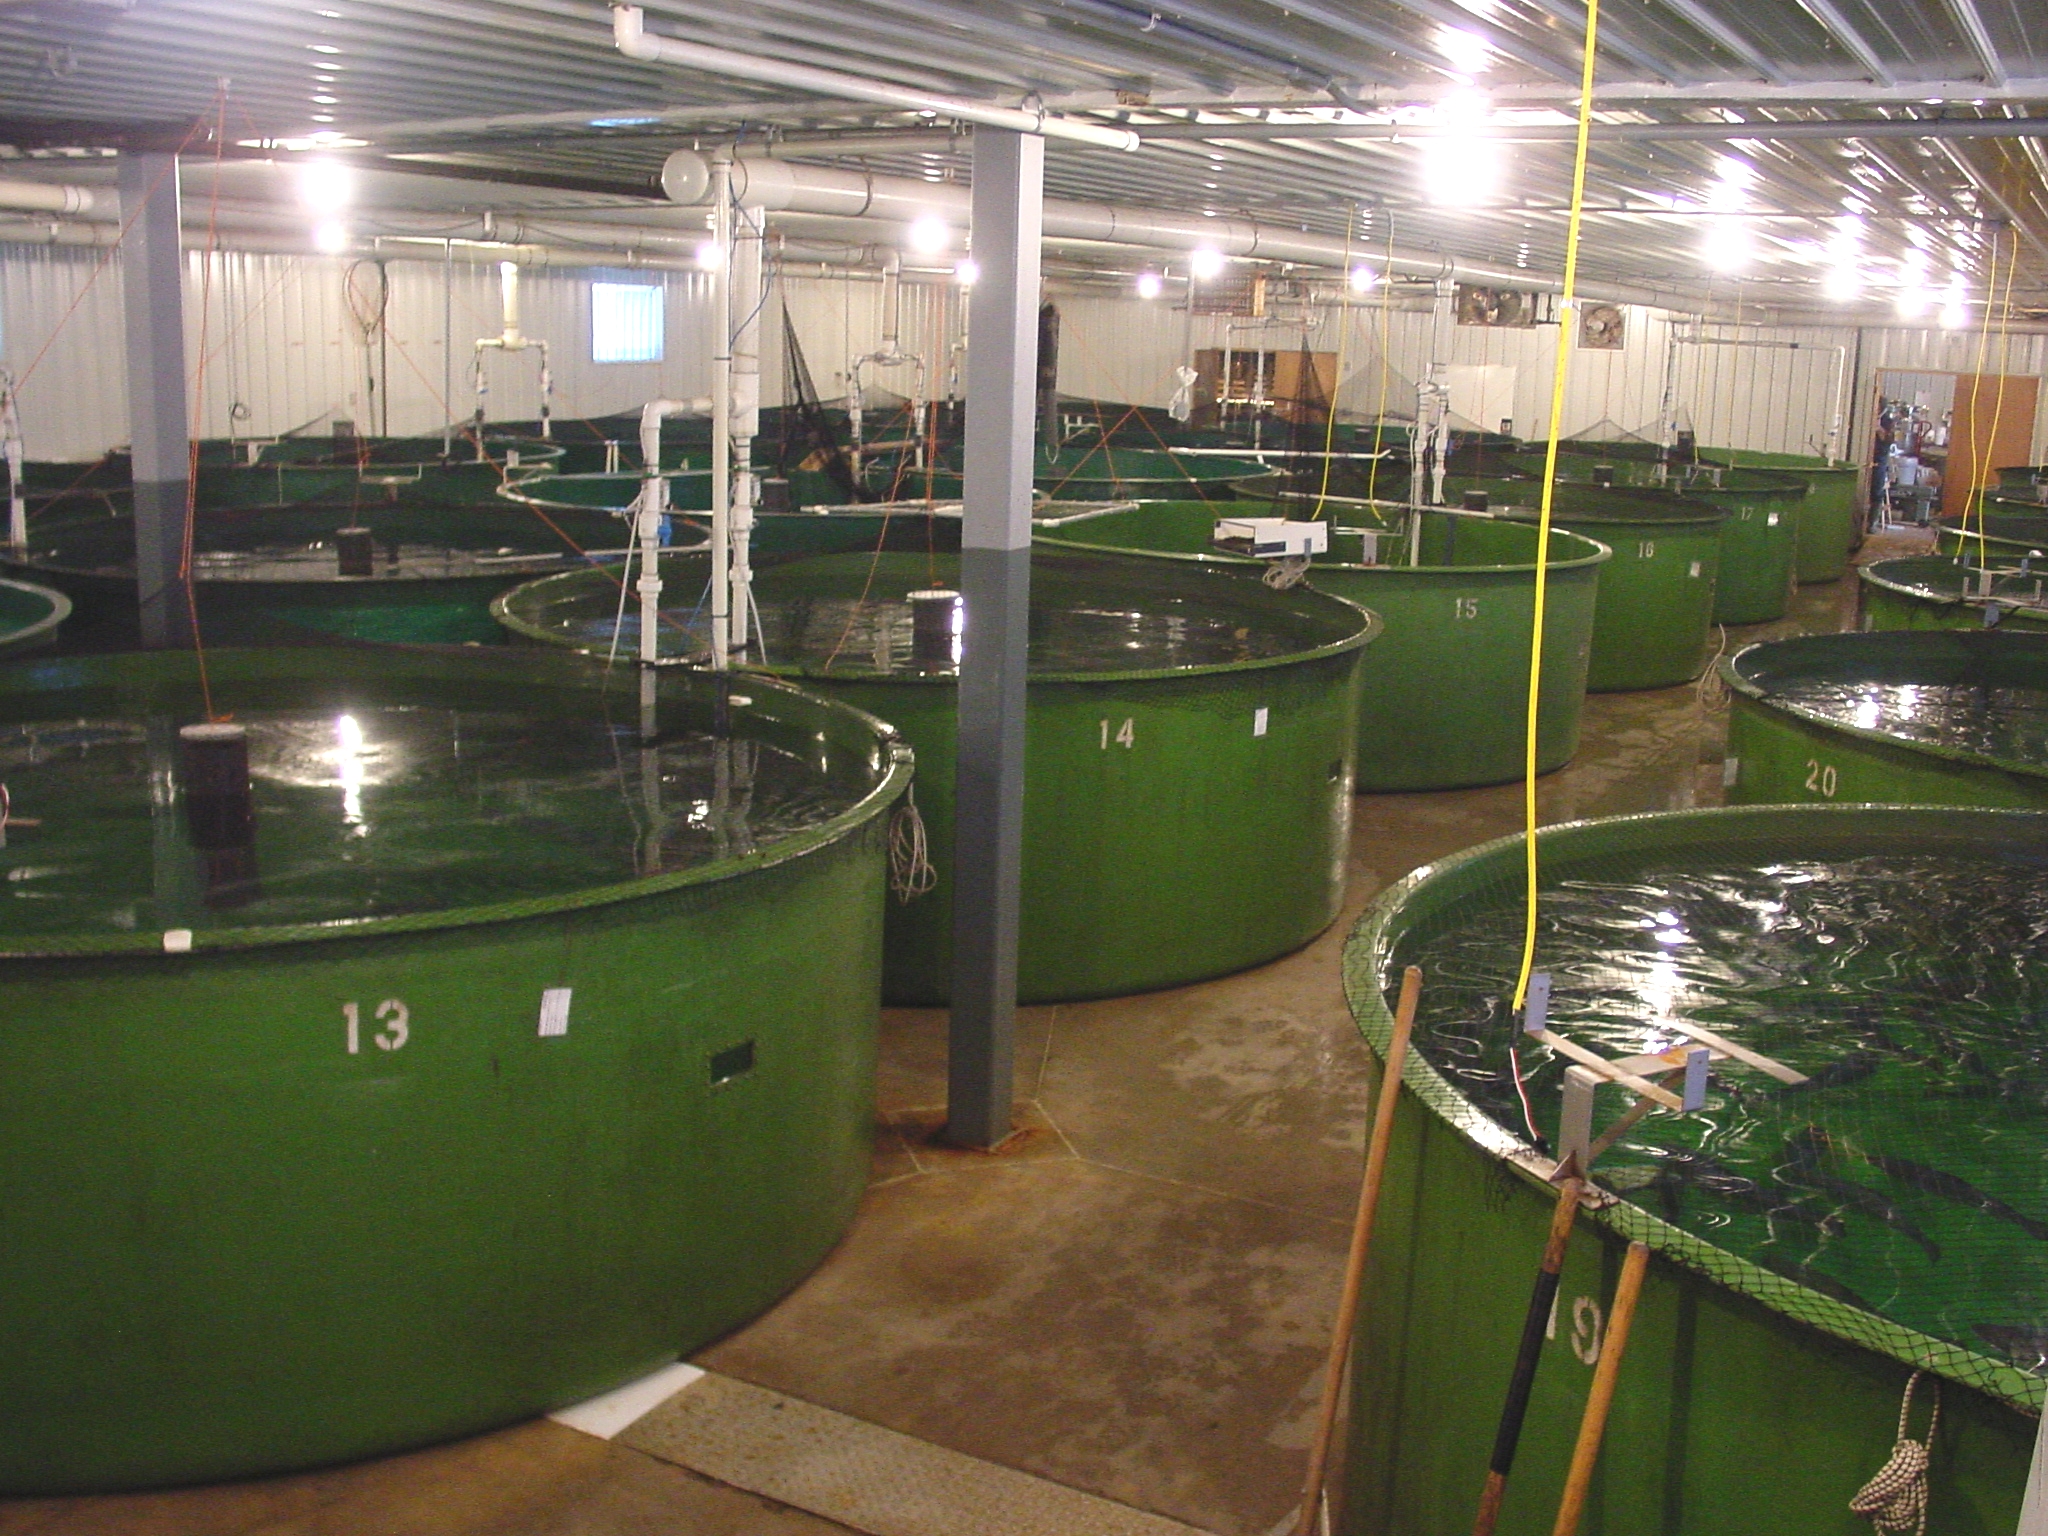 Tanks containing AquaBounty's genetically modified salmon in Waltham, Mass. (Barcroft Media&mdash;Barcroft Media via Getty Images)